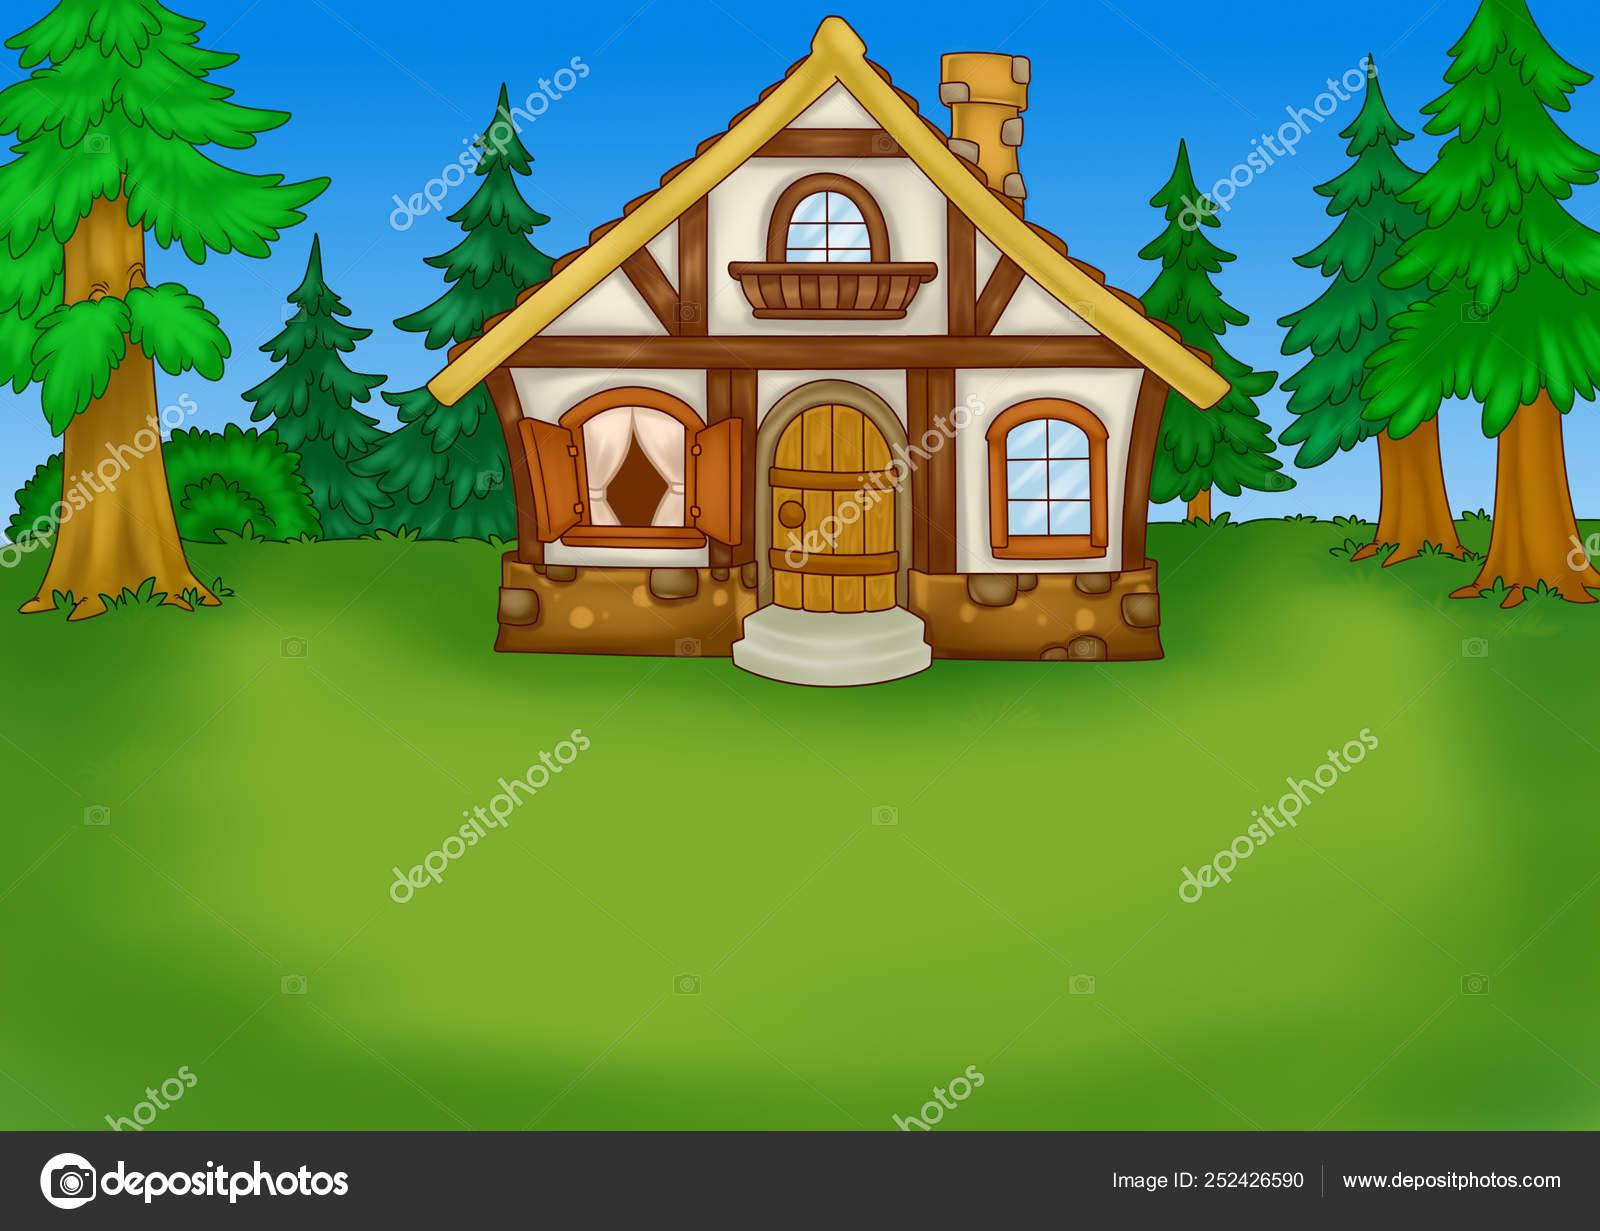 Forest Nature House Background Cartoon Stock Photo by ©Efengai 252426590